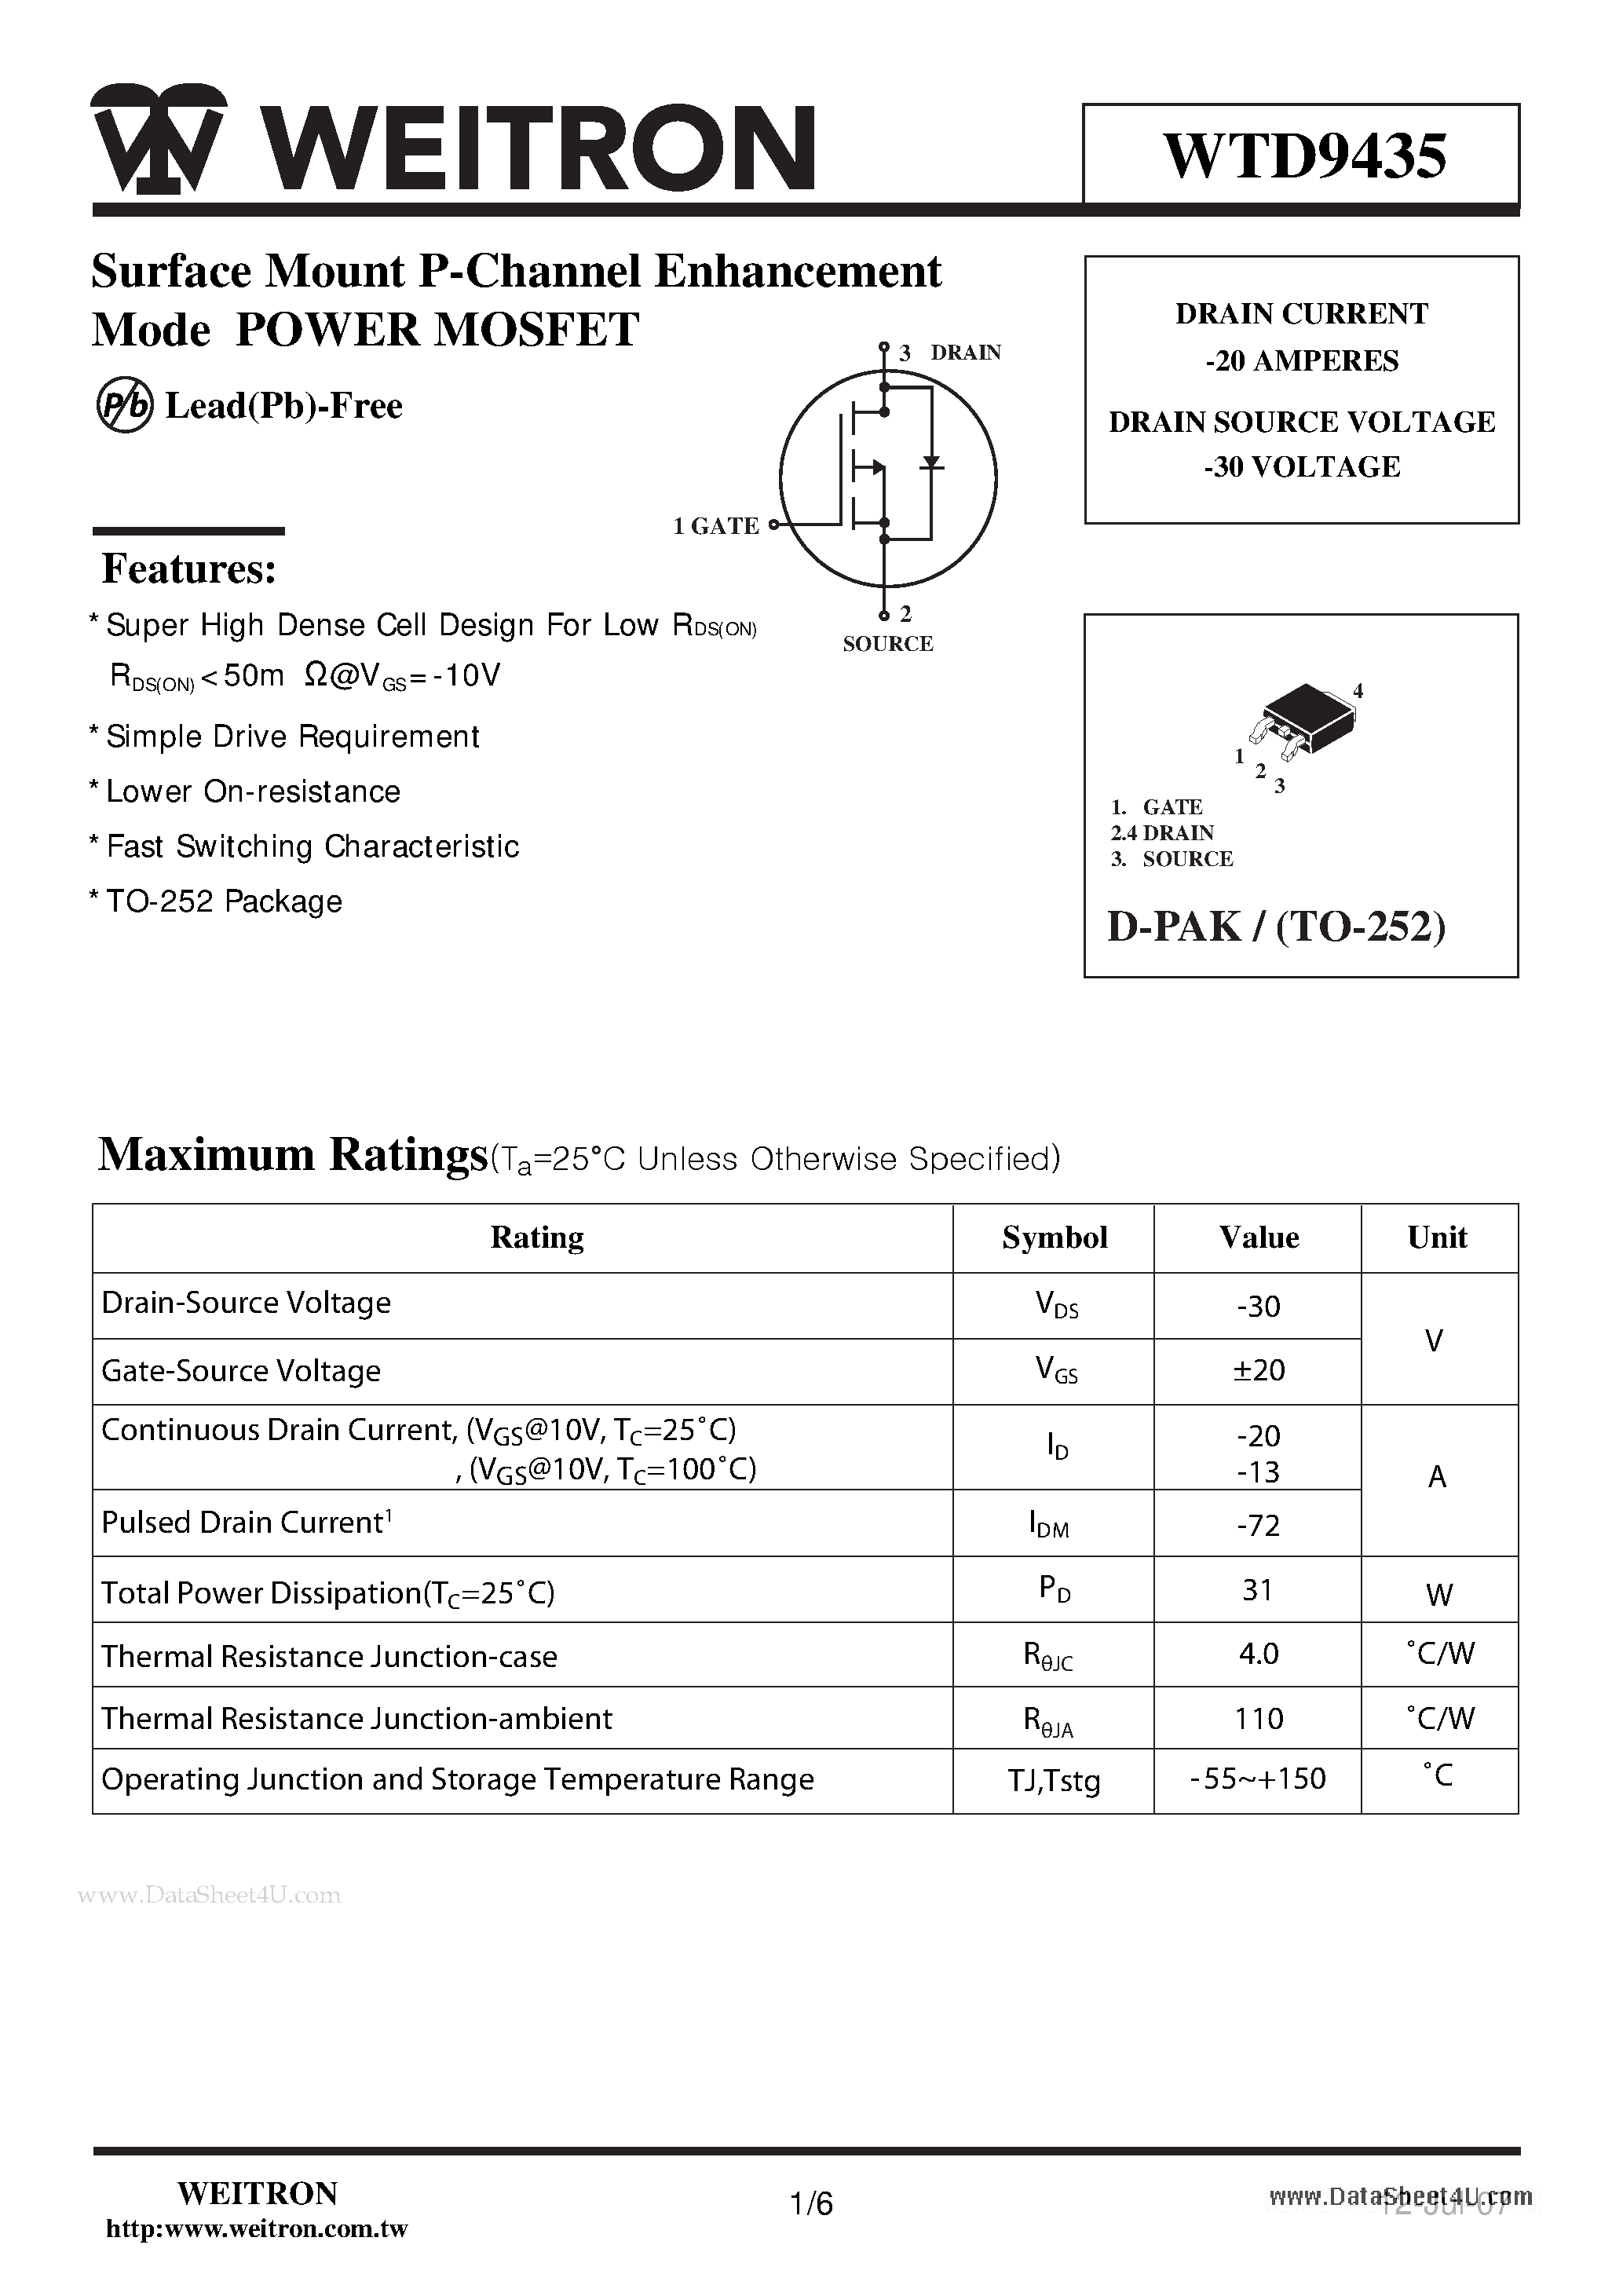 Datasheet WTD9435 - Surface Mount P-Channel Enhancement Mode POWER MOSFET page 1